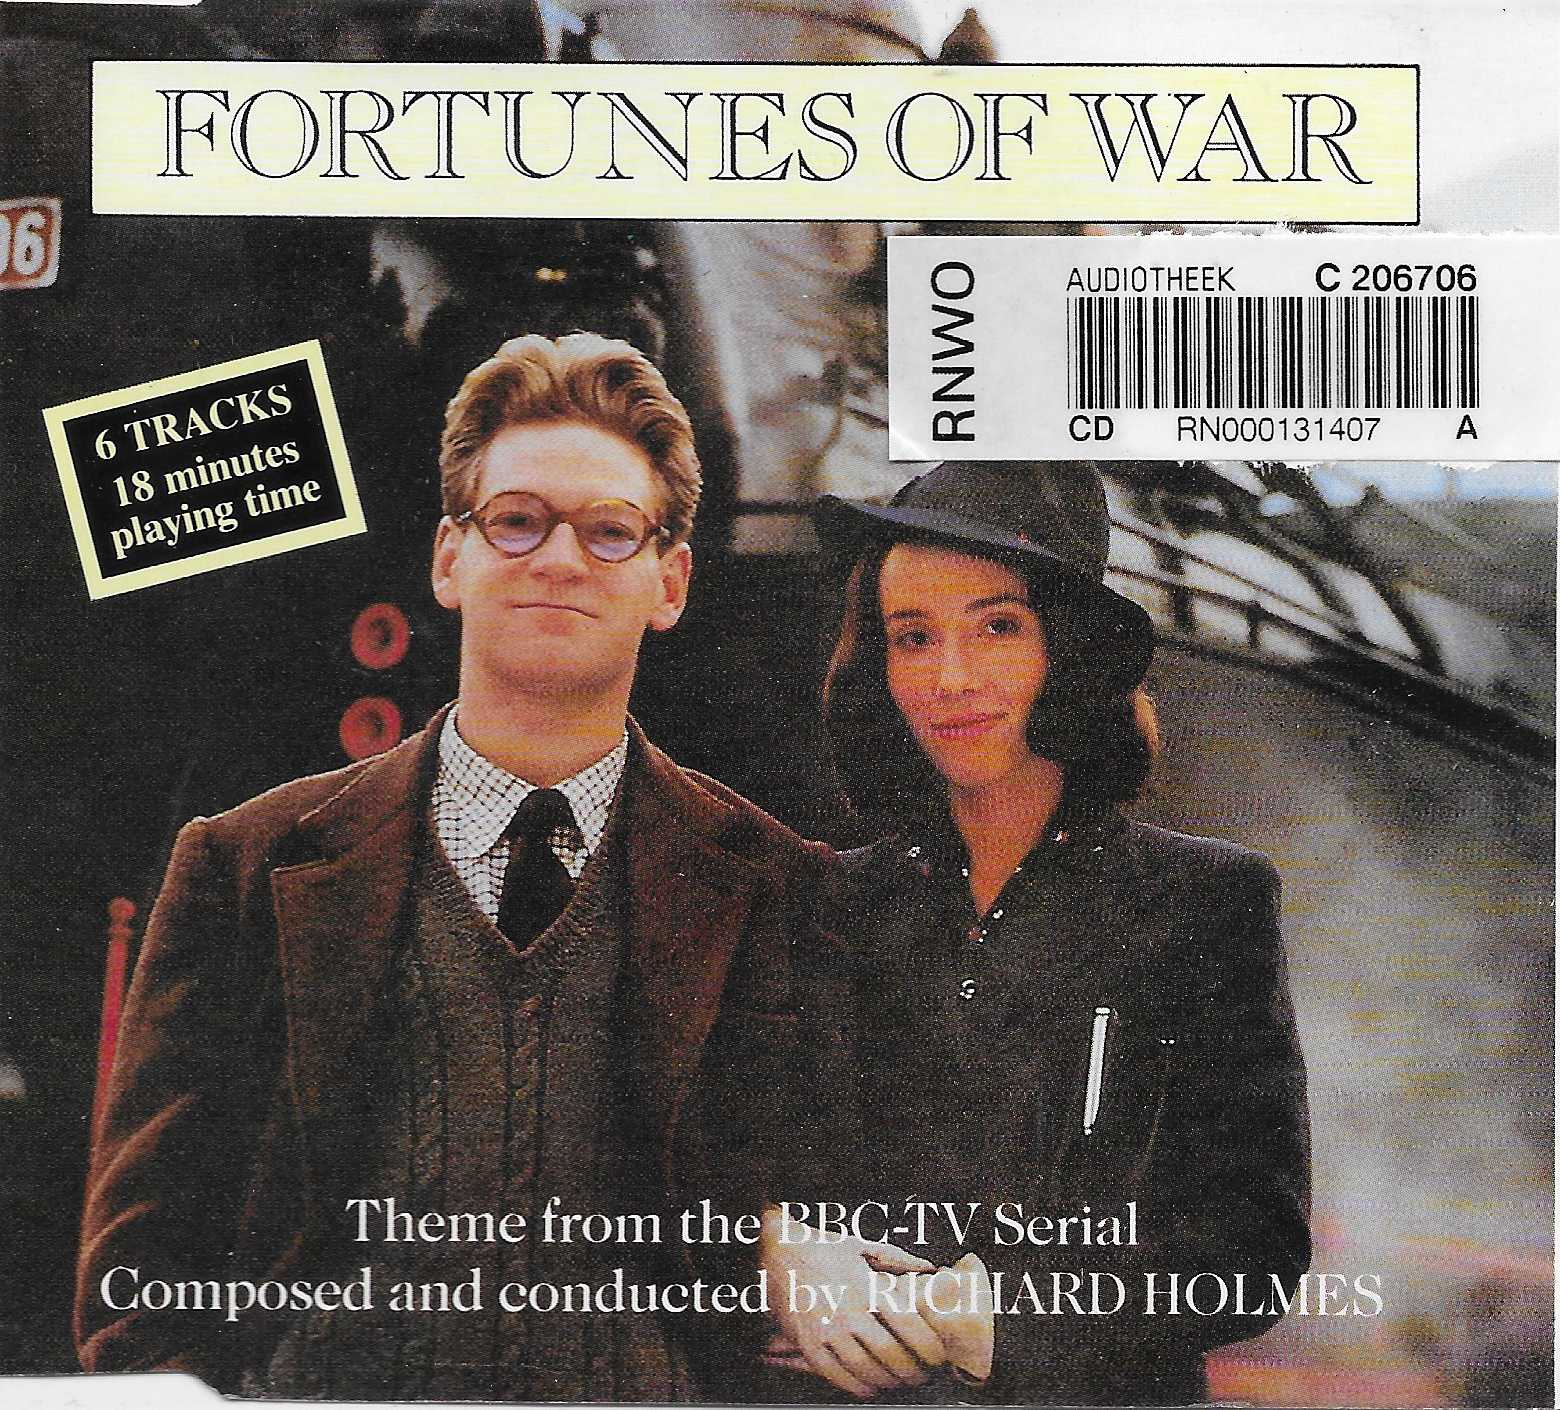 Picture of Fortunes of war by artist Richard Holmes from the BBC cdsingles - Records and Tapes library